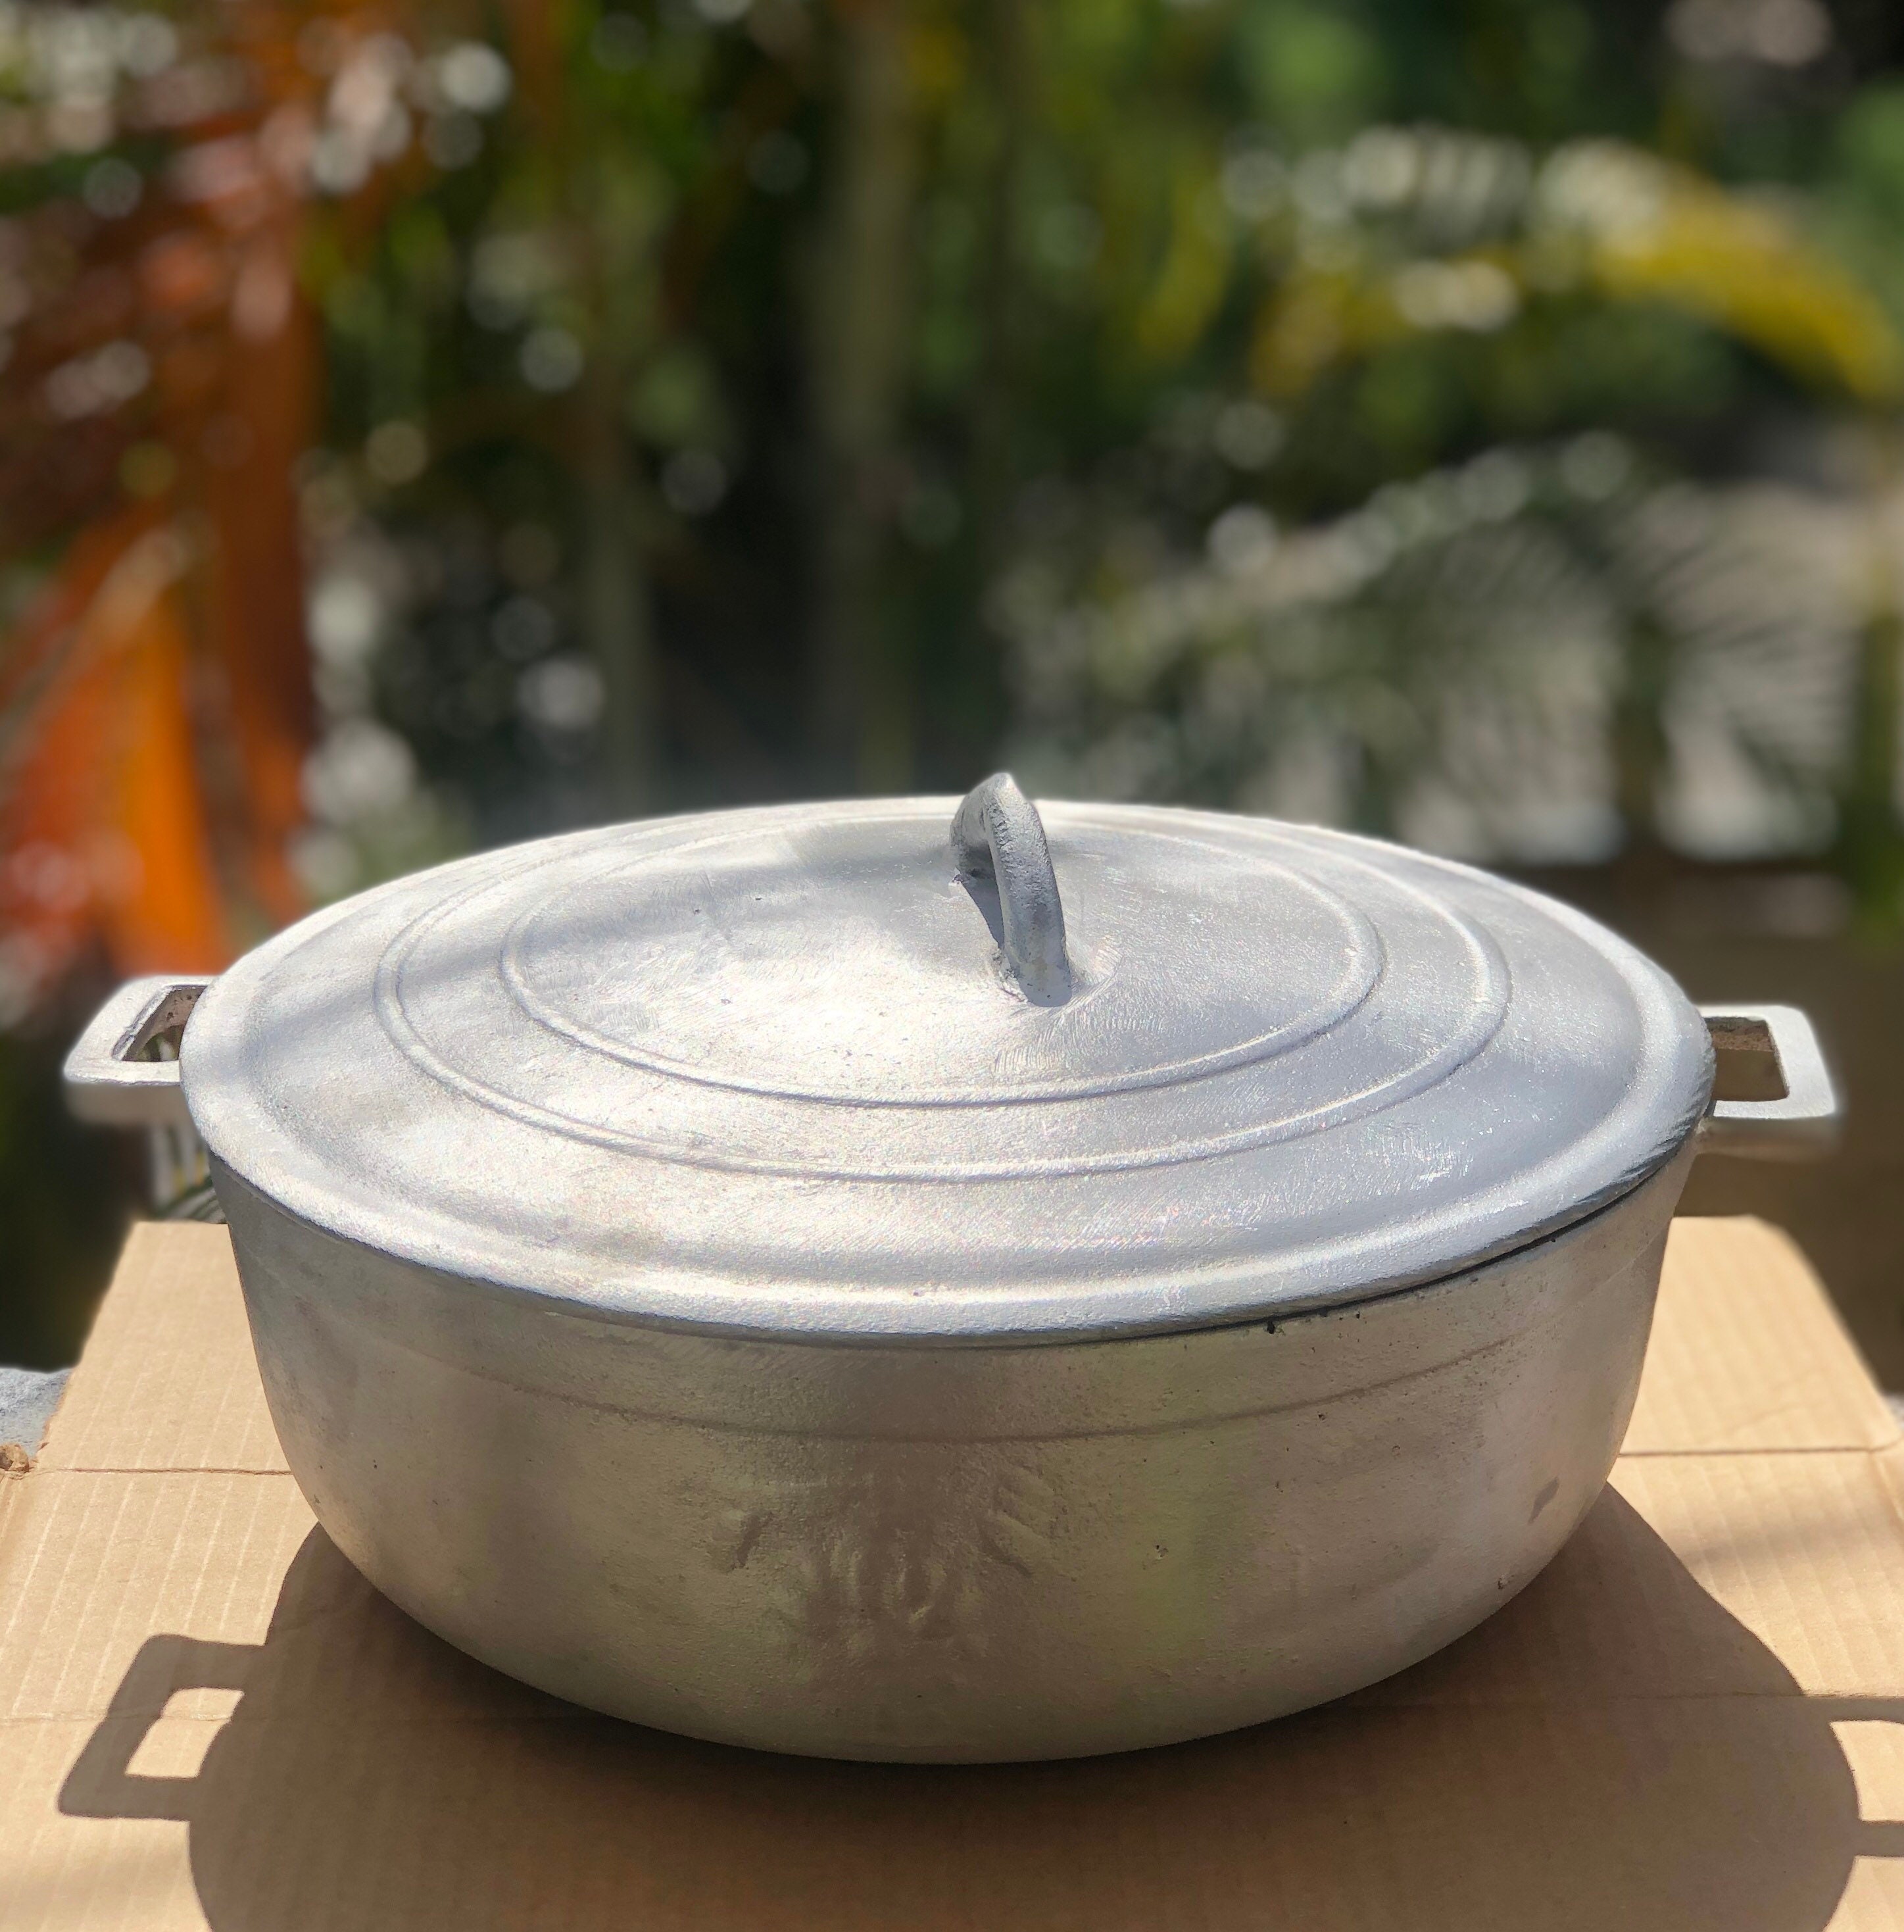 Dutch Ovens for sale in Port of Spain, Trinidad and Tobago